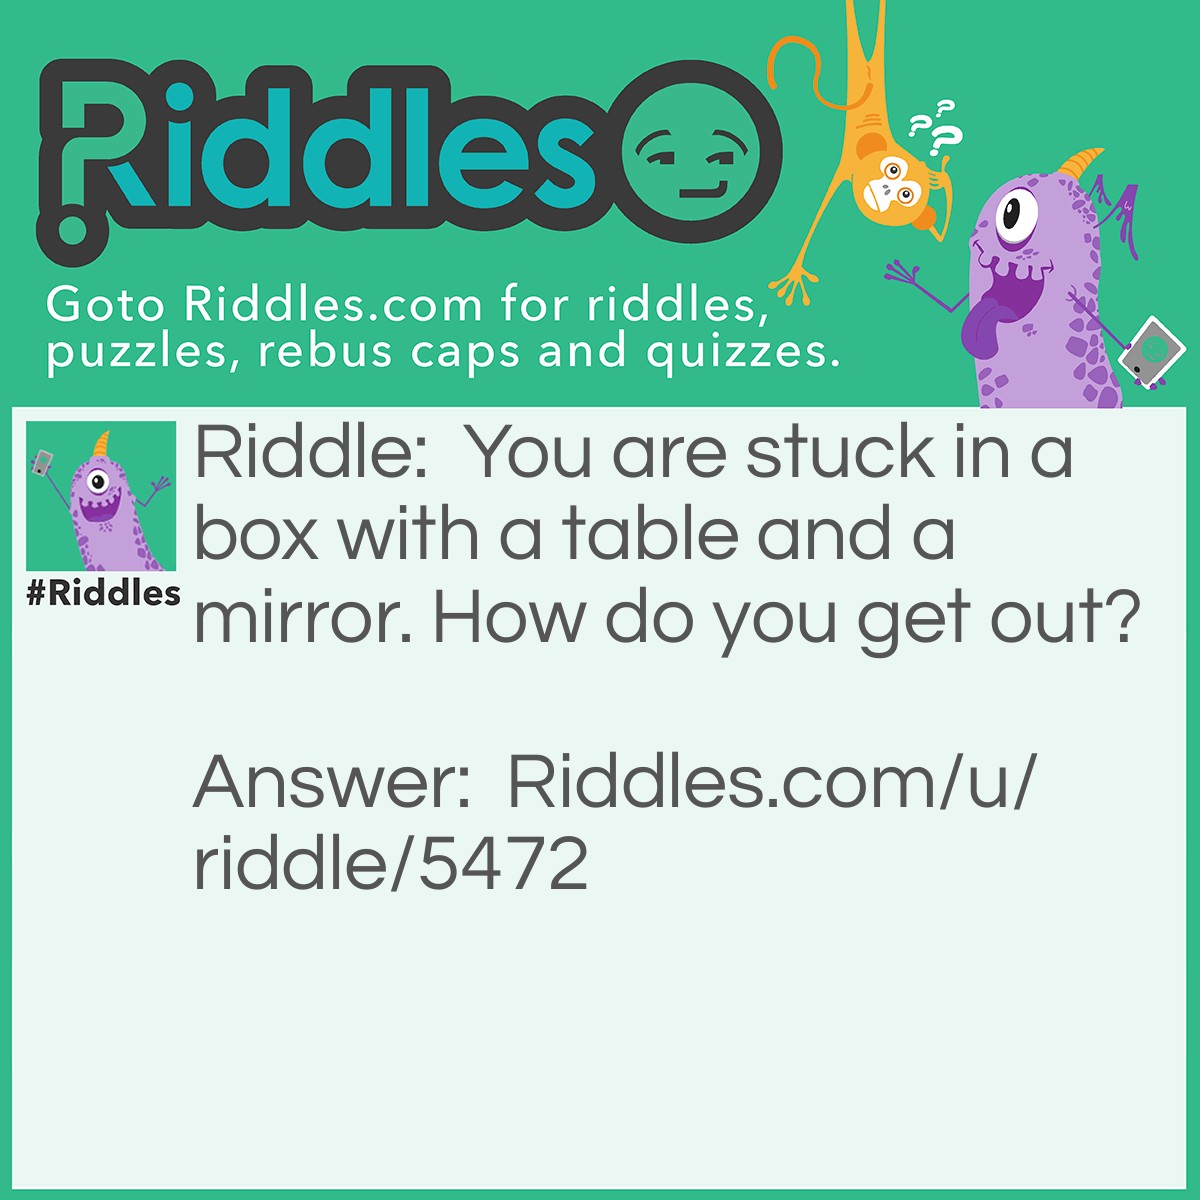 Riddle: You are stuck in a box with a table and a mirror. How do you get out? Answer: You look in the mirror and see what you saw. Take the saw, cut the table in half, two halves make a whole and you go out the hole.